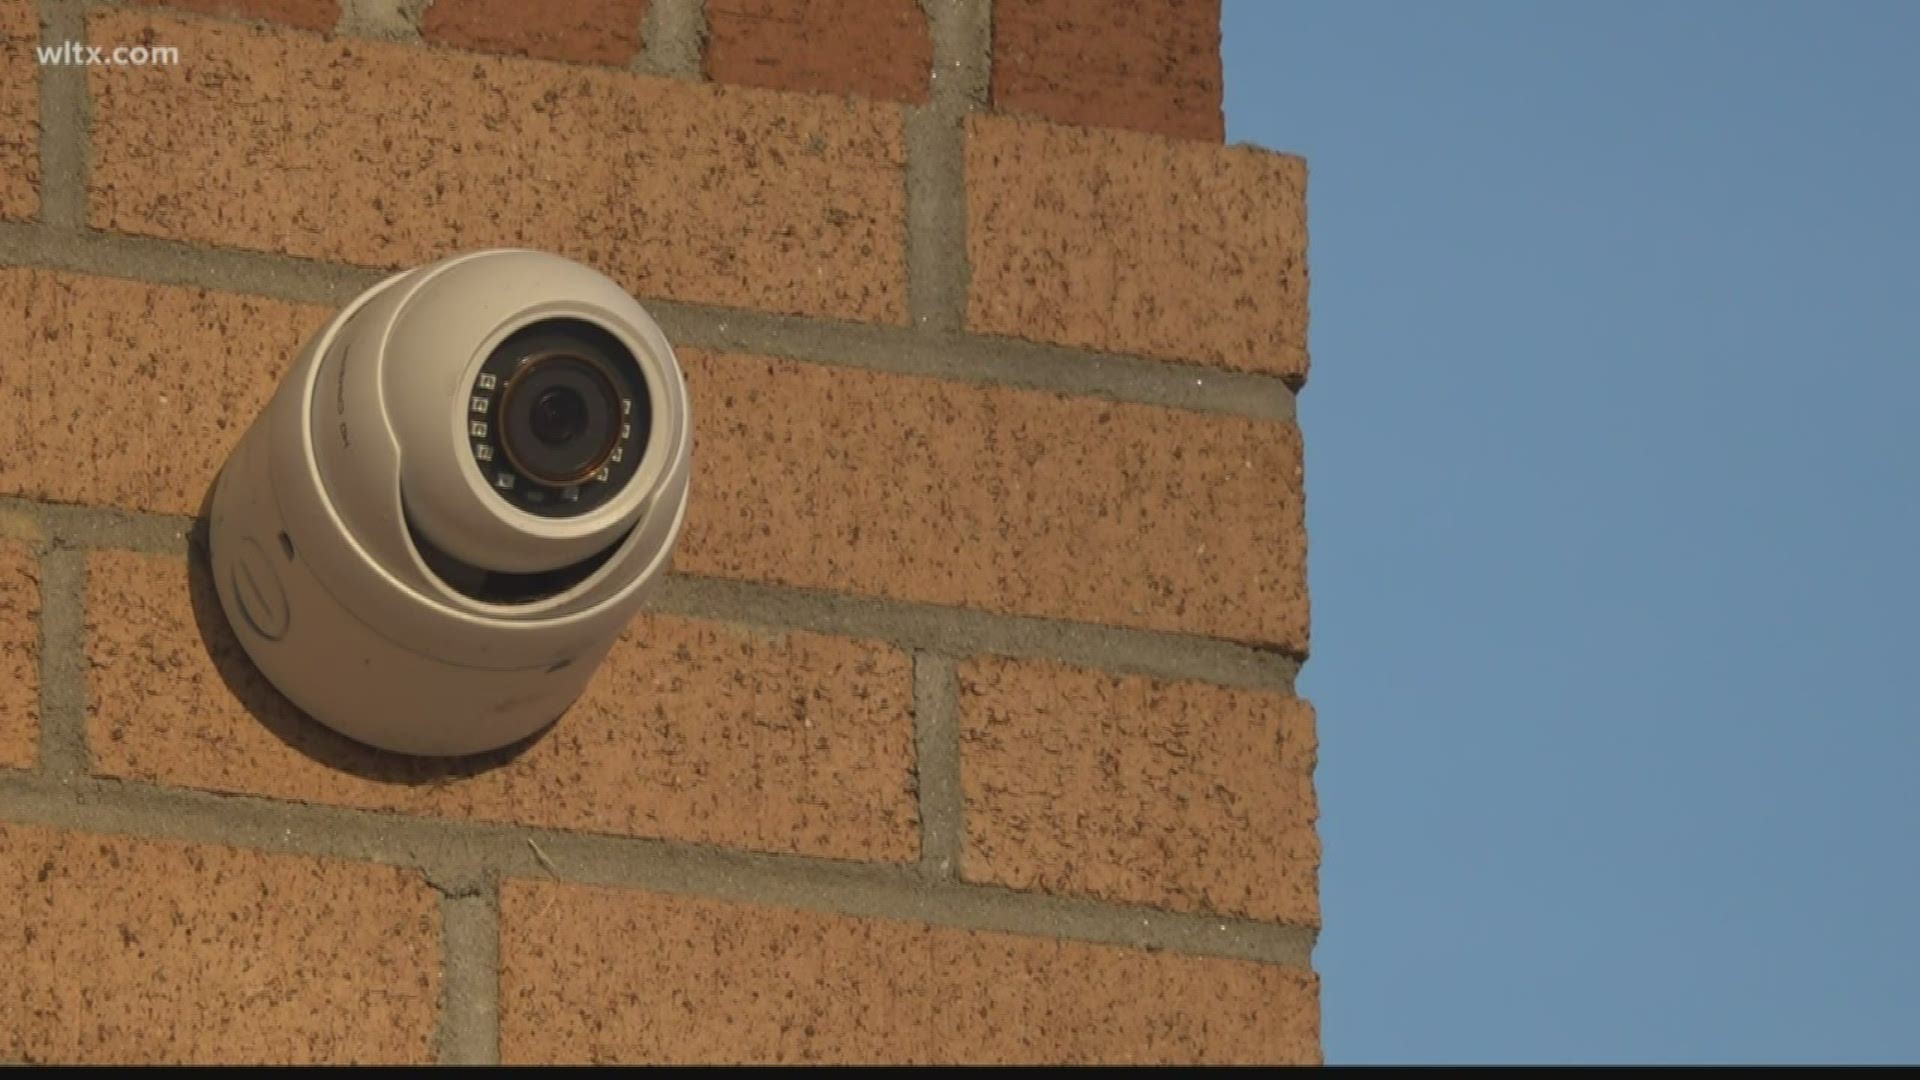 The city of Orangeburg and the public safety department are cracking down on crime with the addition of several surveillance cameras throughout the city